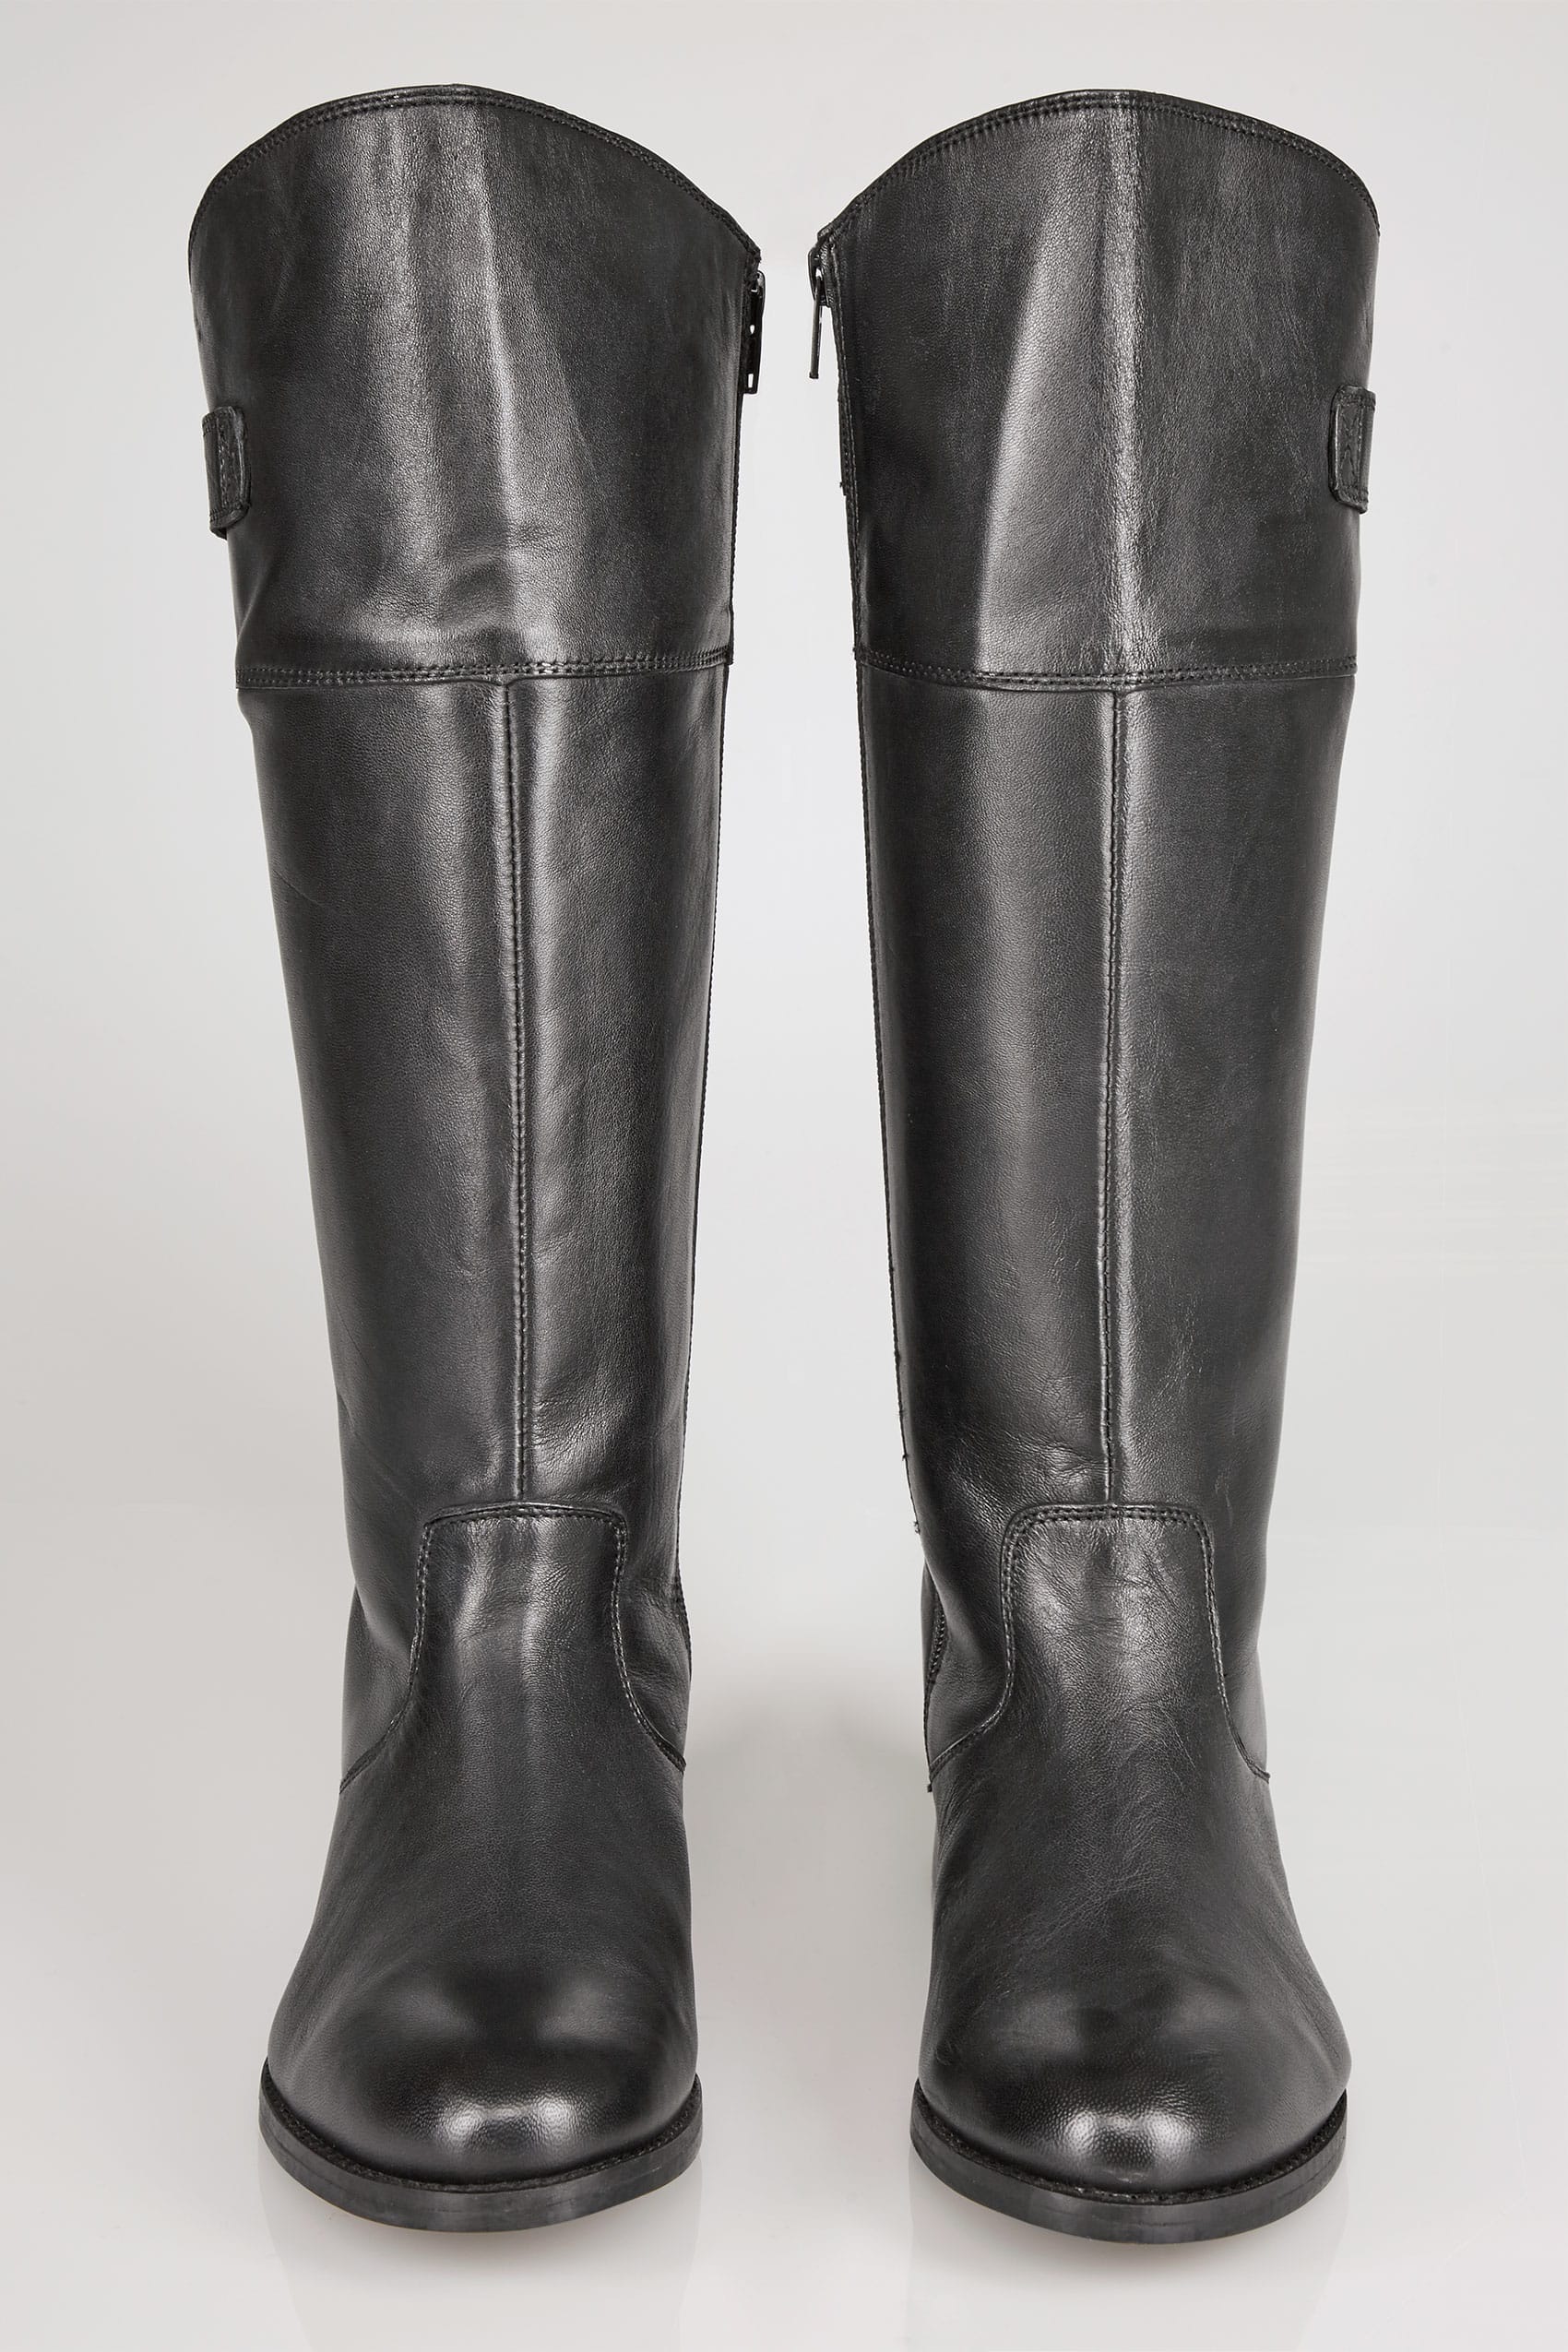 Black Knee High Leather Riding Boots With Elasticated Panels In Eee Fit 1078